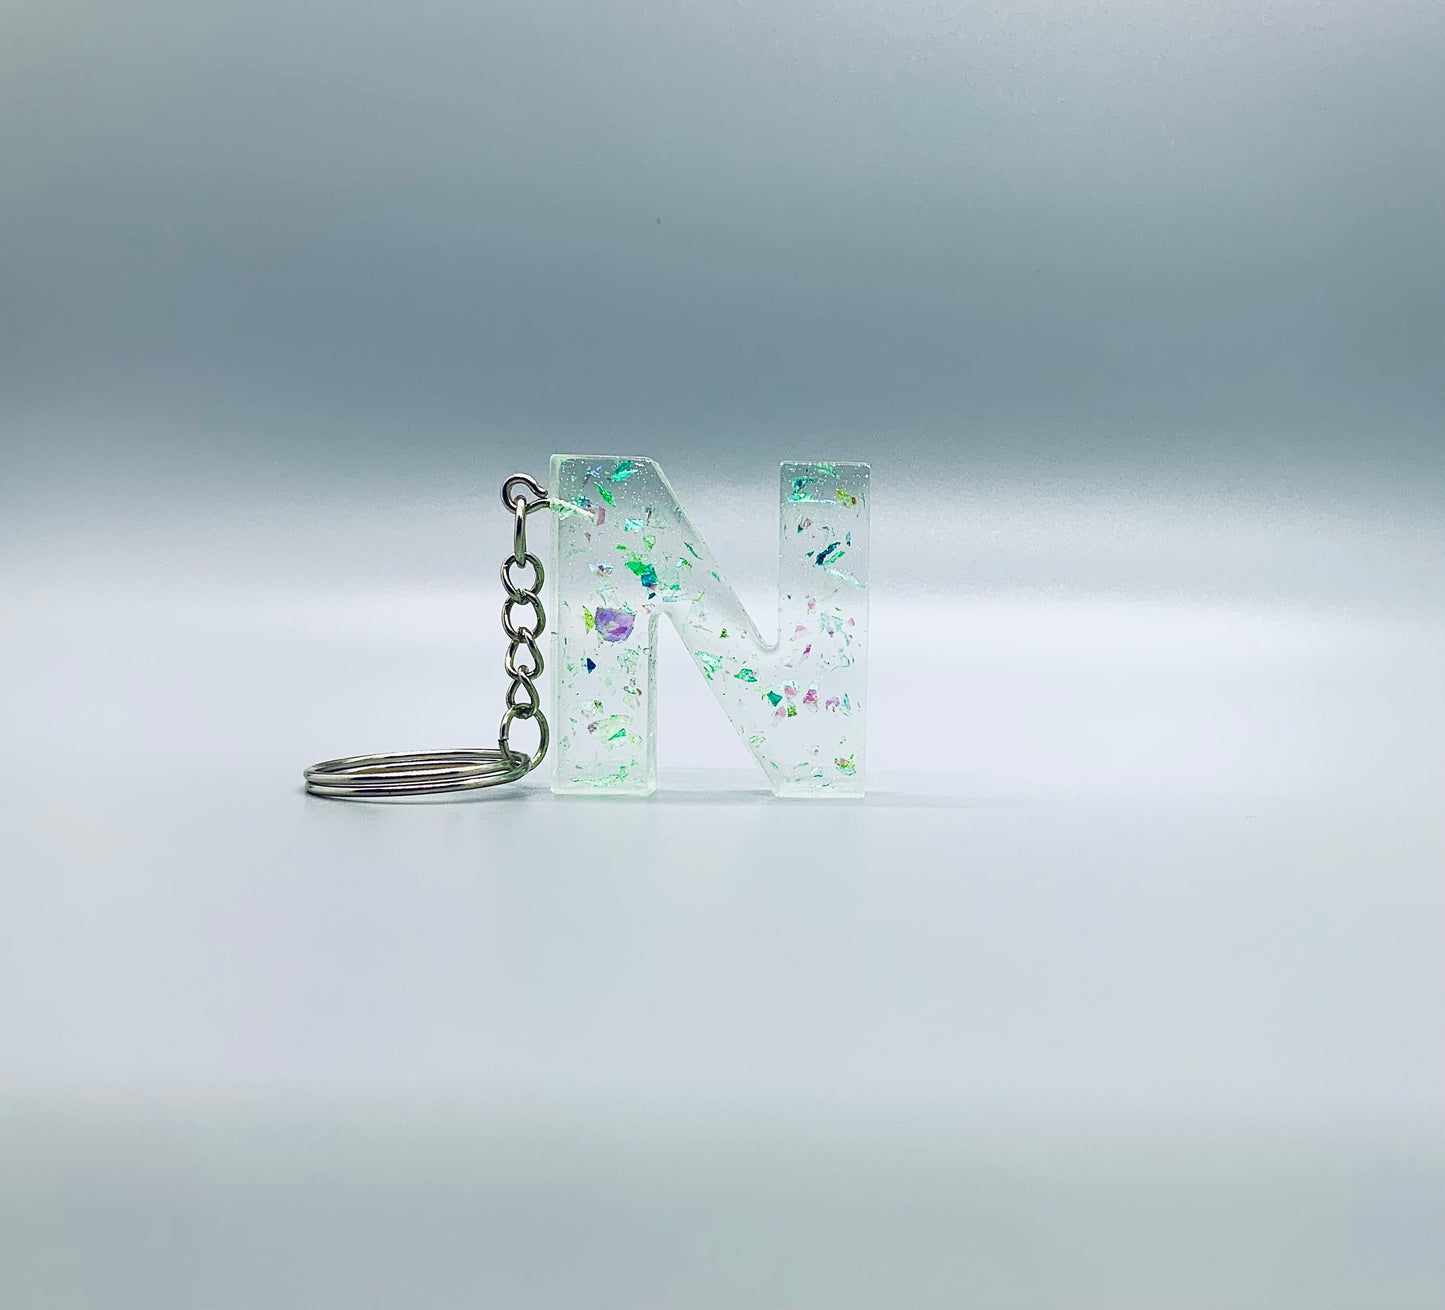 The Letter "N" Keychain - BeautiesbyHand